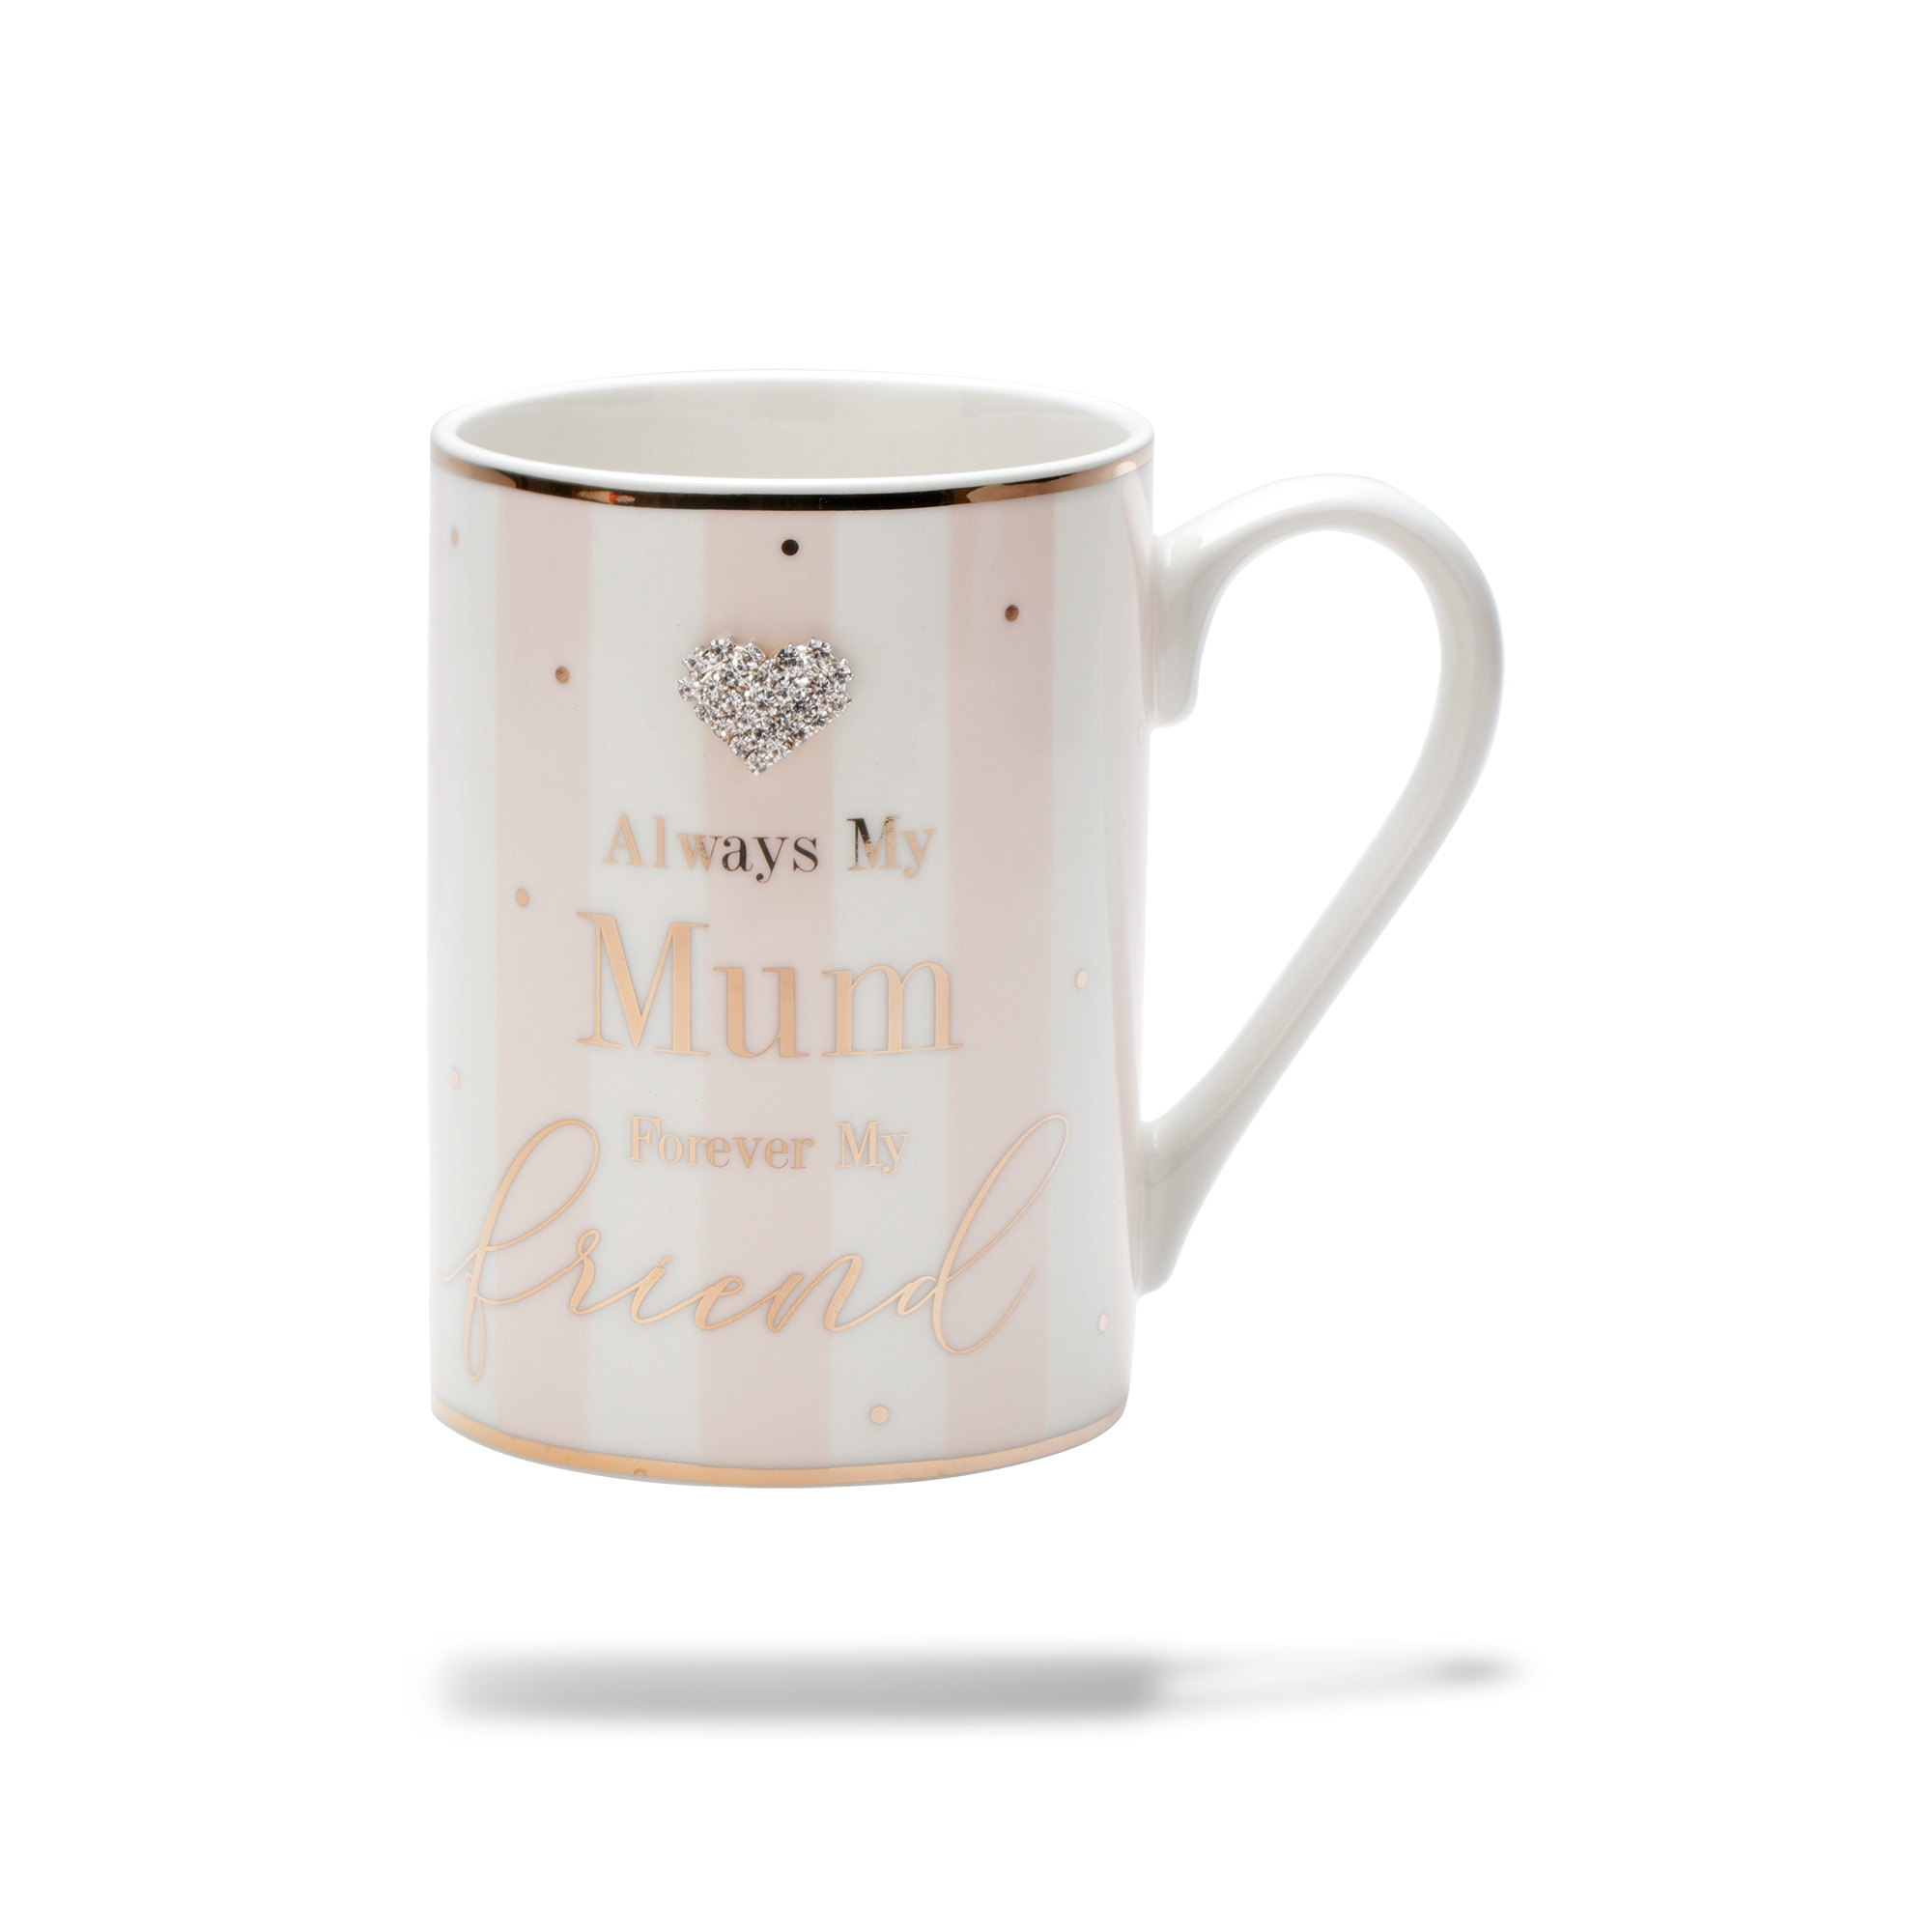 Archies | ARCHIES CERAMIC COFFEE MUG WITH ALWAYS MY MOM FOREVER MY FRIEND PRINTED